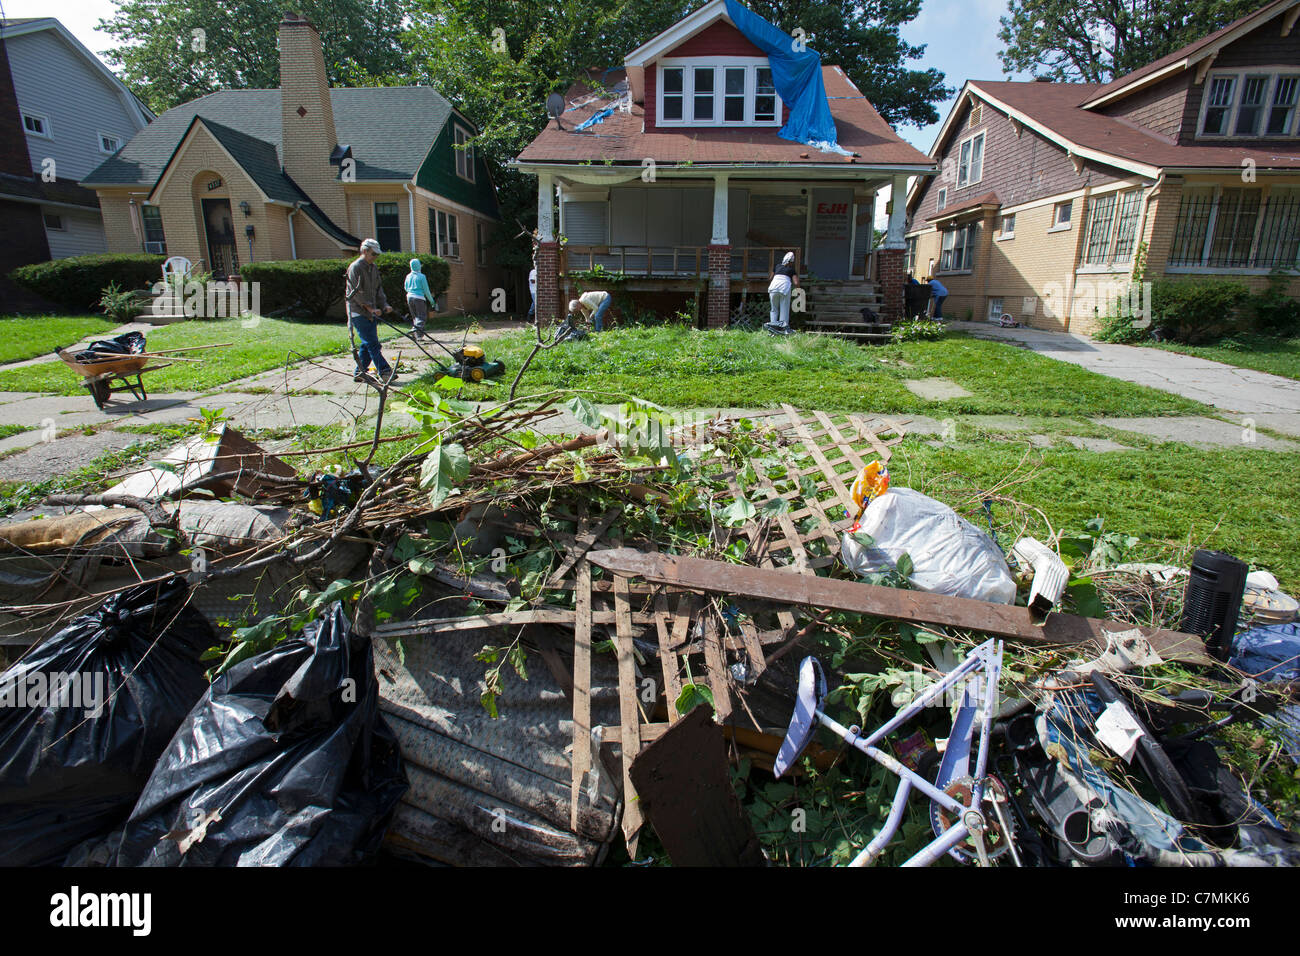 Detroit, Michigan - Members of the Three Mile Drive block club clean trash from a vacant home in their neighborhood. Stock Photo